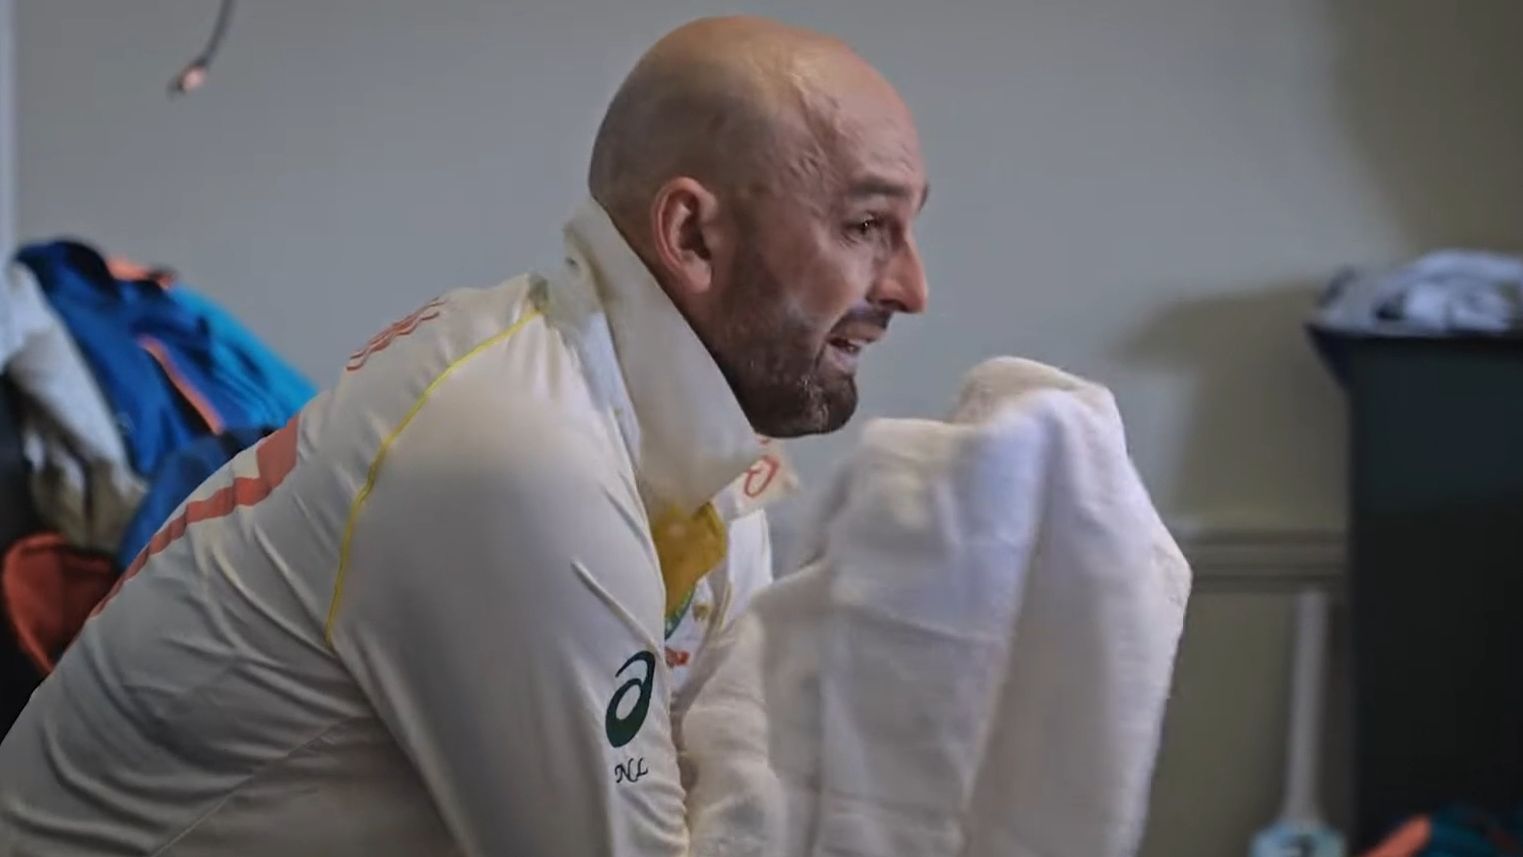 Nathan Lyon is shown in tears after being injured during the 2023 Ashes in the latest series of The Test docuseries.